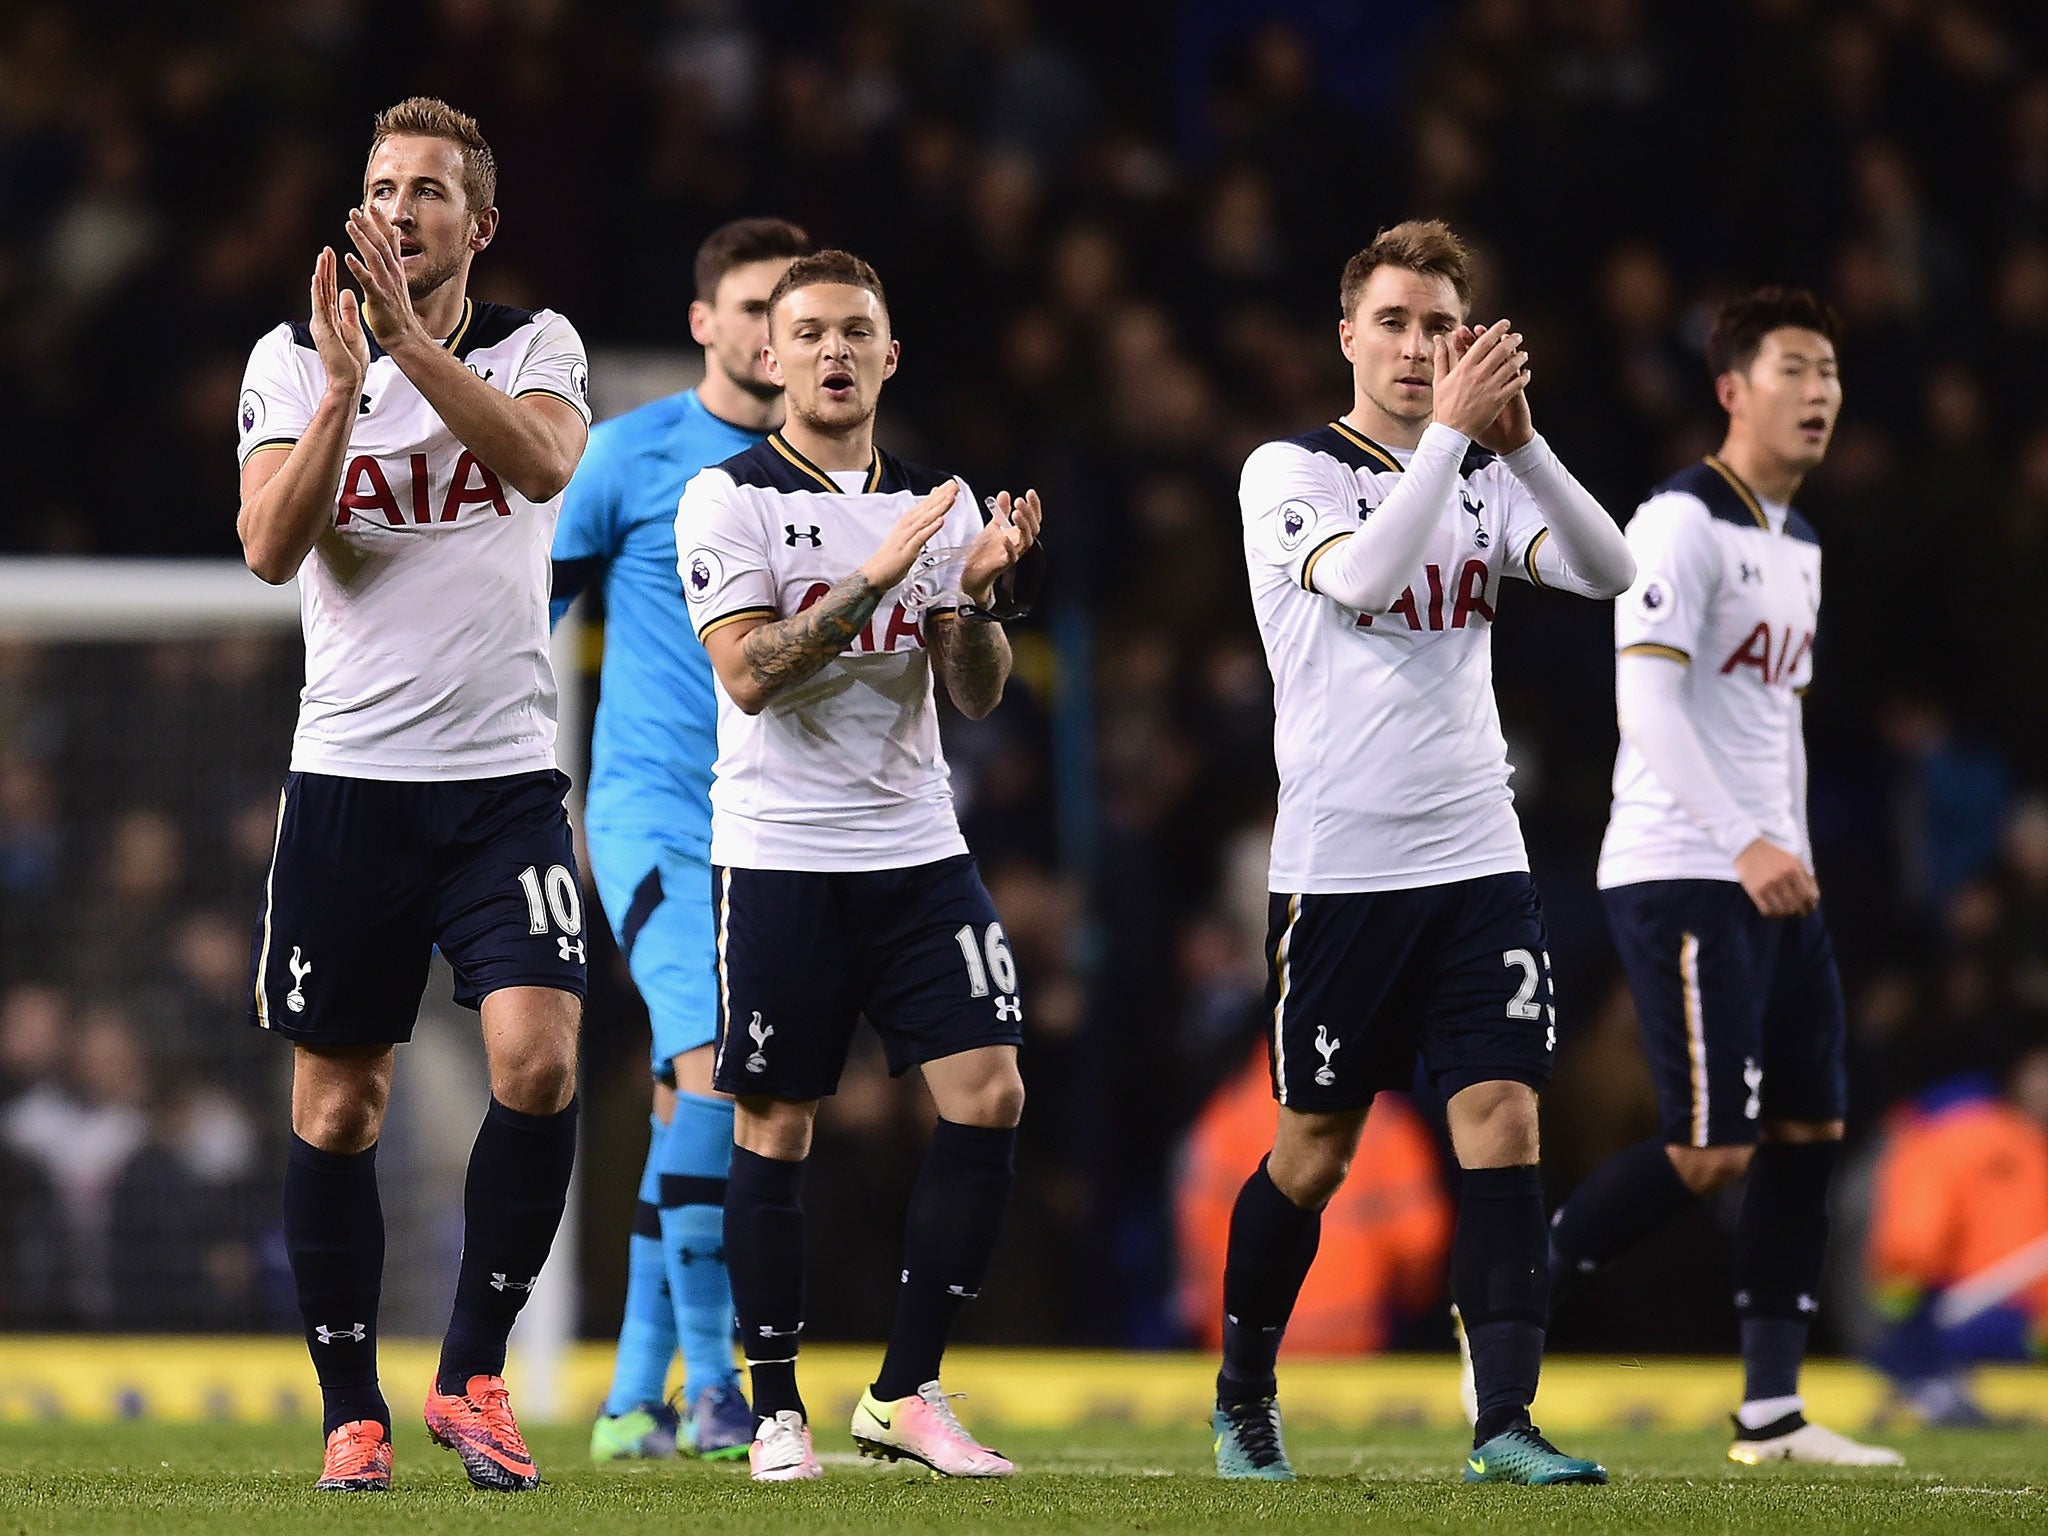 Tottenham finally brought to an end their seven-match run without a win